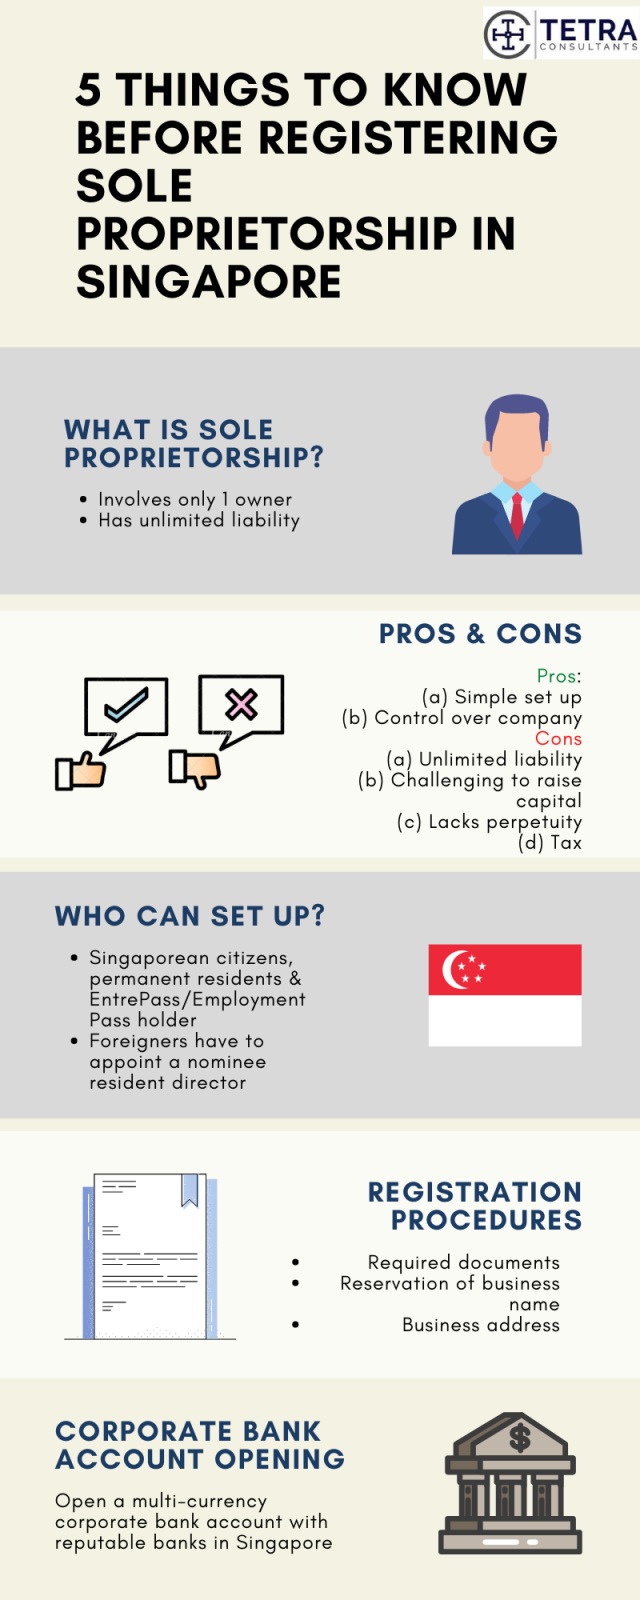 registering-sole-proprietorship-in-singapore-top-things-to-know